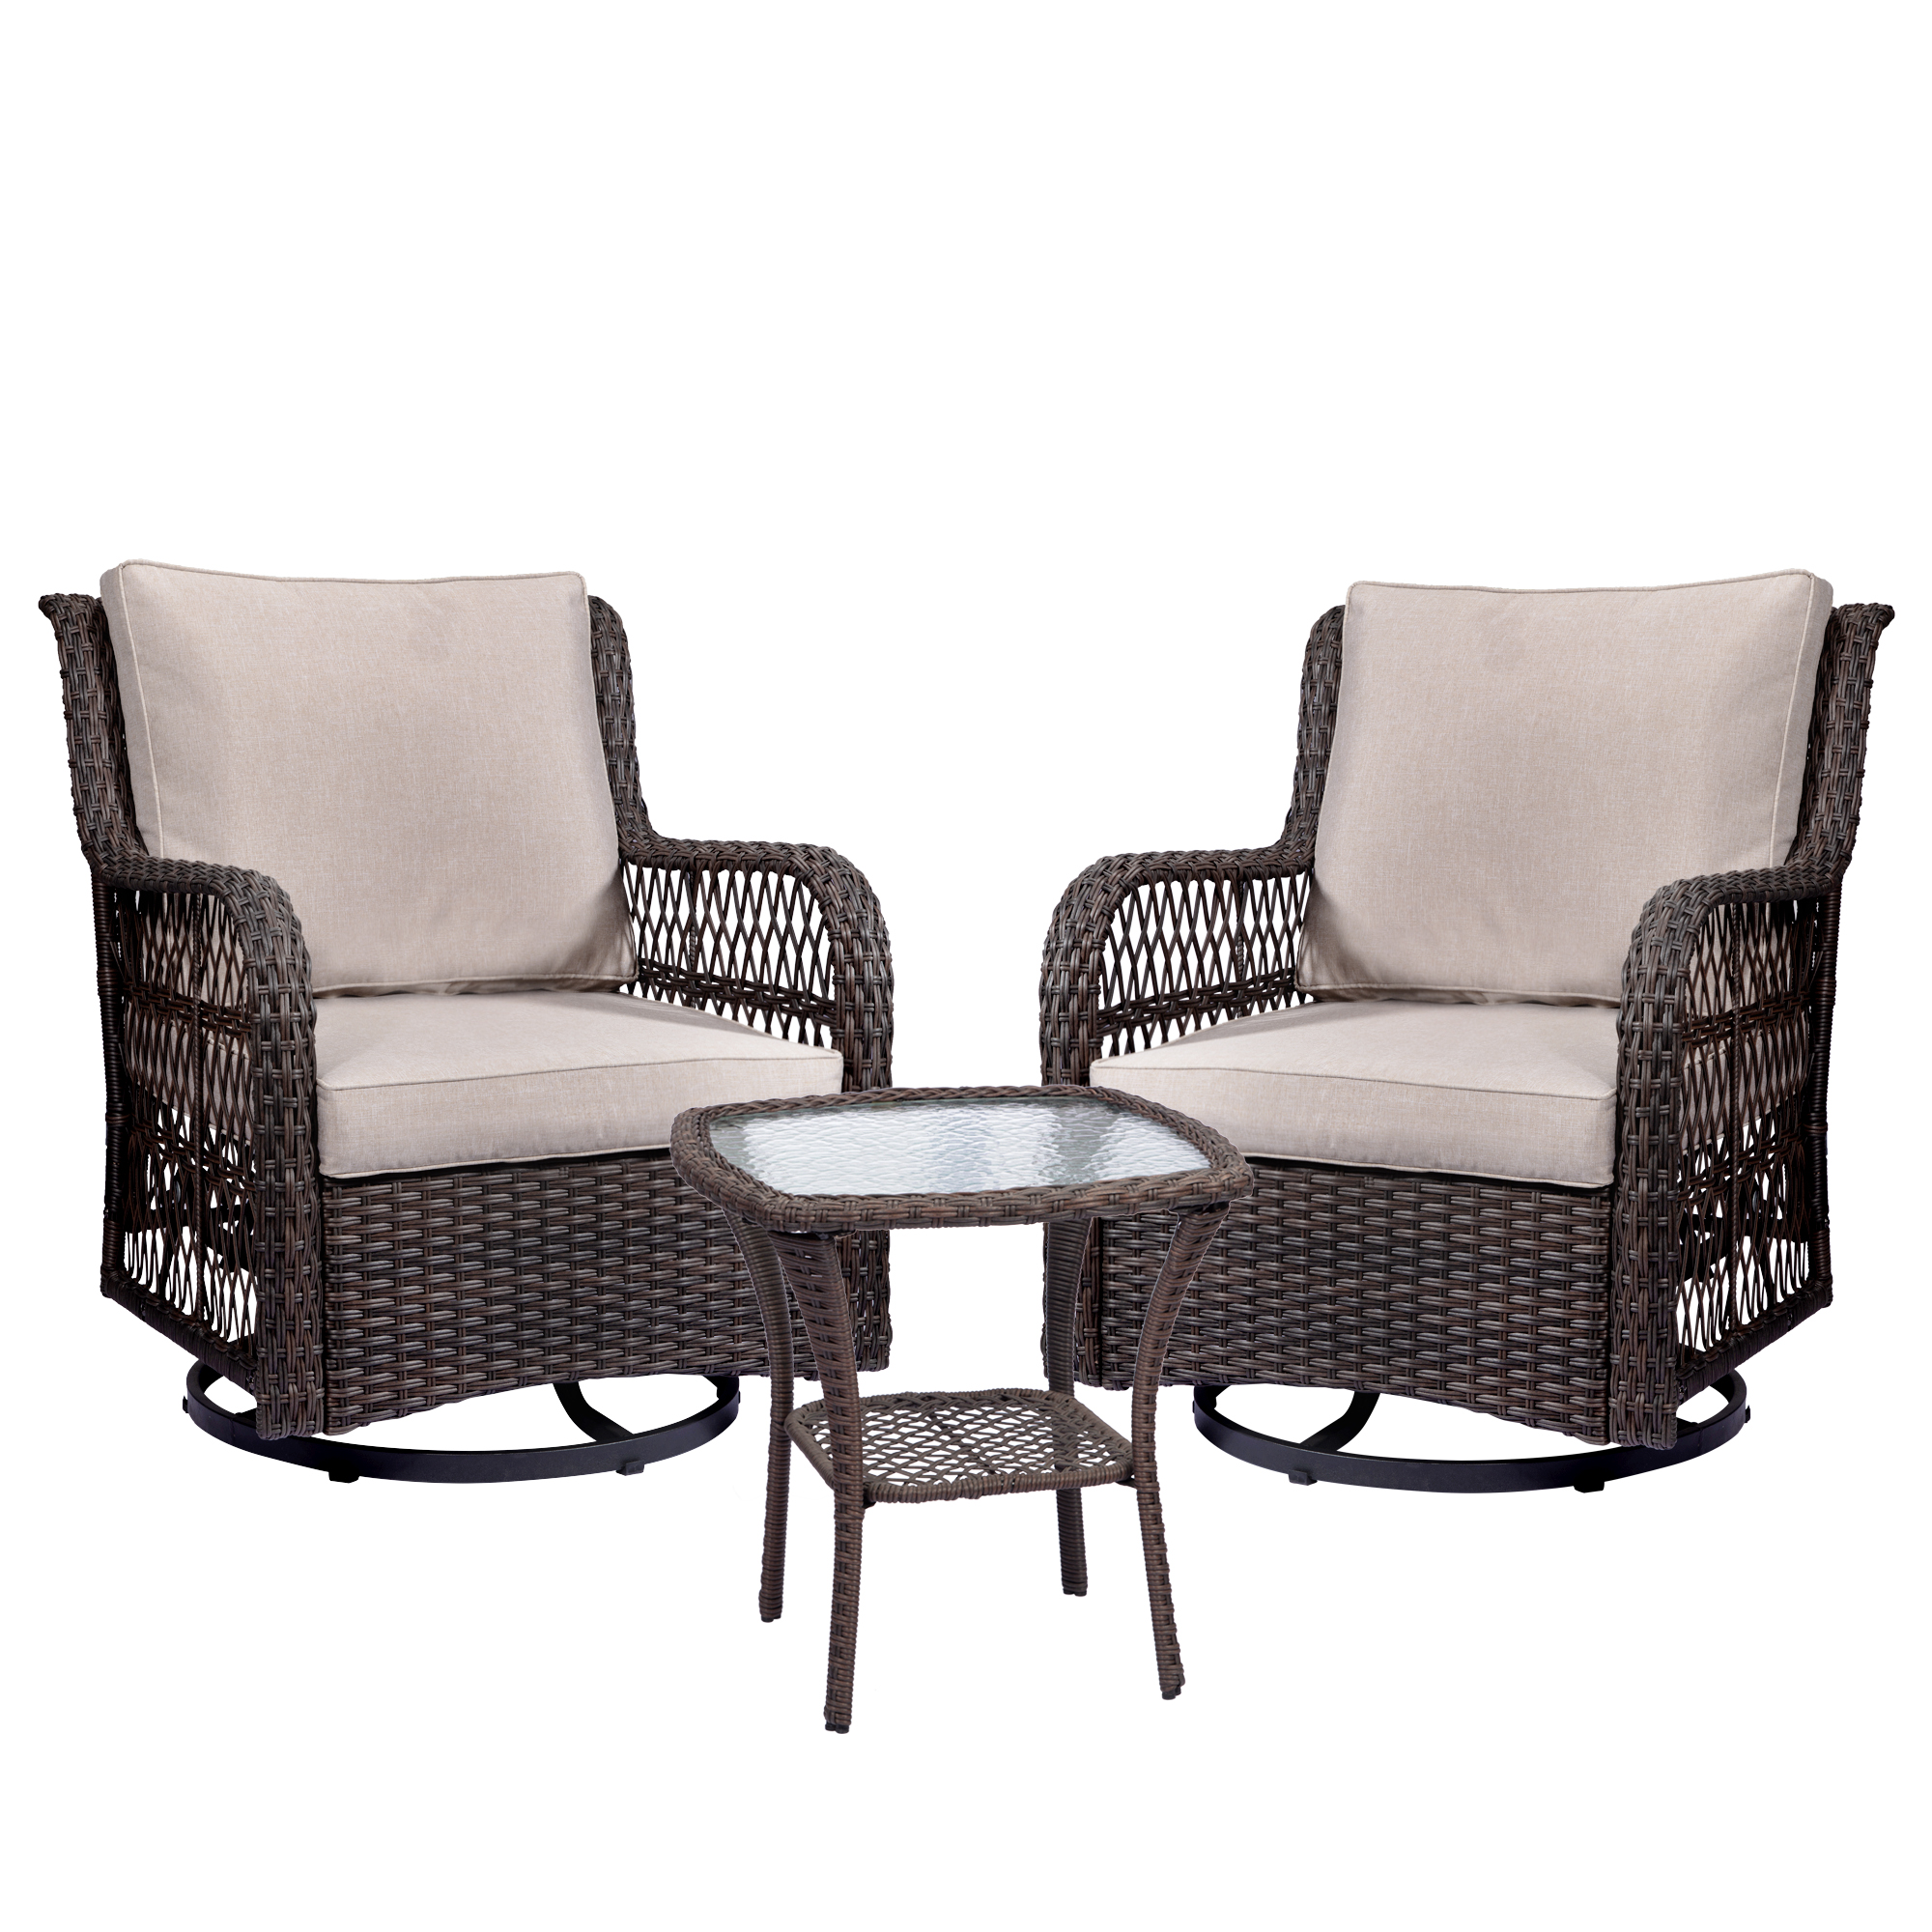 Mulanimo 3 Pieces Patio Set Outdoor Wicker Patio Furniture Sets Modern Bistro Set, Conversation Set Rattan Chairs Set of 2 with Coffee Table for Backyard, Beige - image 1 of 7